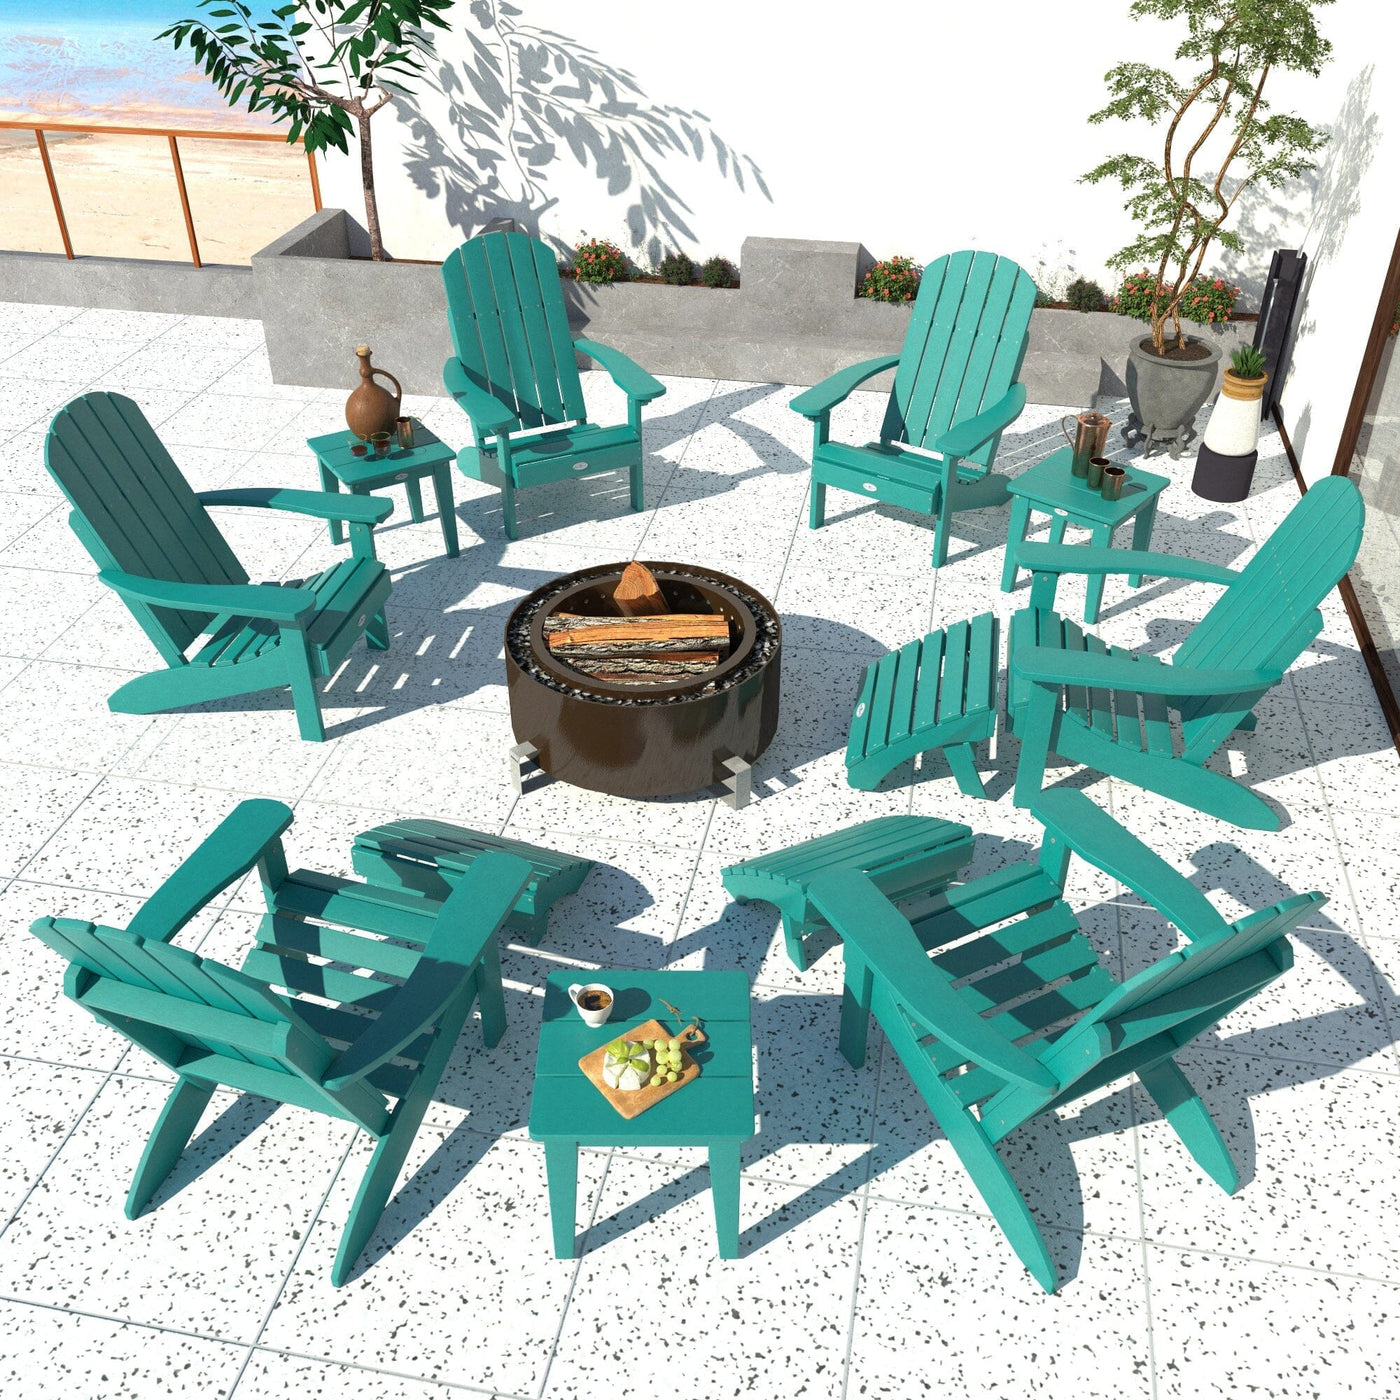 Cape Classic Adirondack, Side Table and Ottoman 12 pc Set Kitted Set Bahia Verde Outdoors 